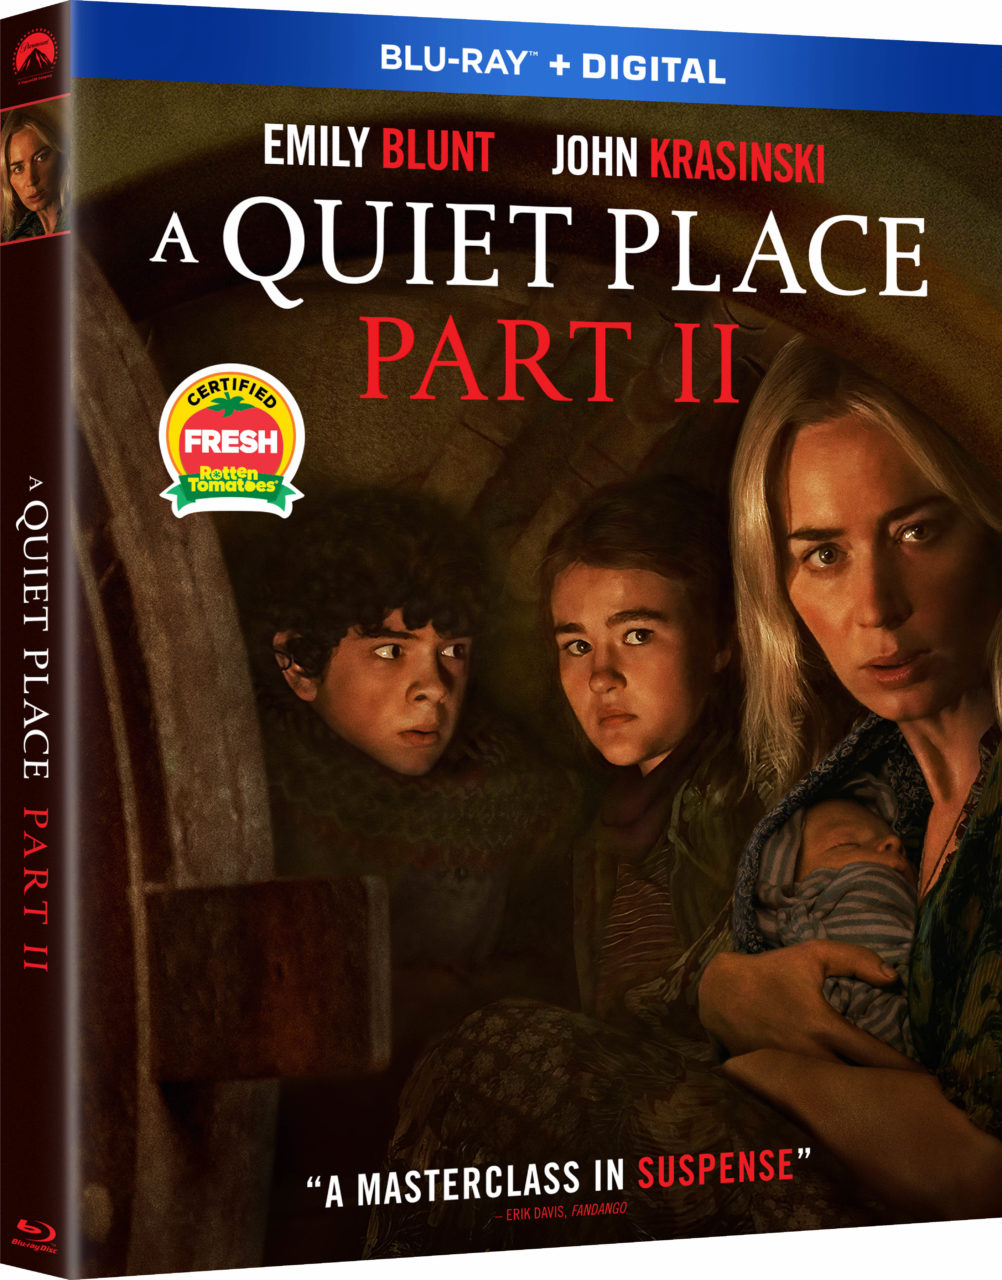 A Quiet Place Part II Blu-Ray Combo Pack cover (Paramount Home Entertainment)